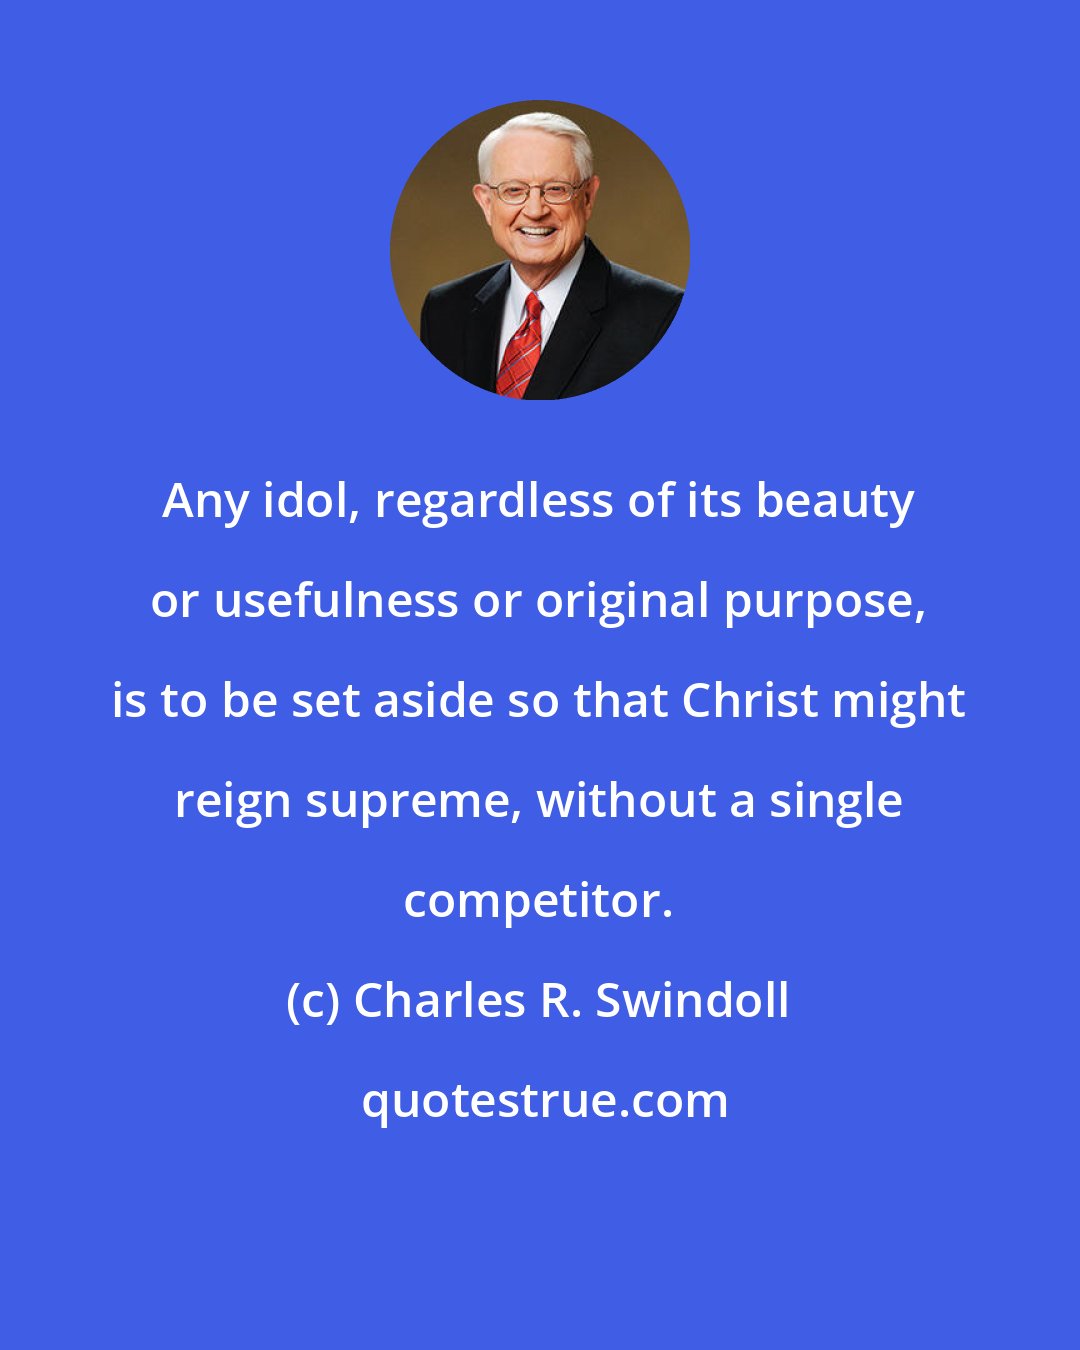 Charles R. Swindoll: Any idol, regardless of its beauty or usefulness or original purpose, is to be set aside so that Christ might reign supreme, without a single competitor.